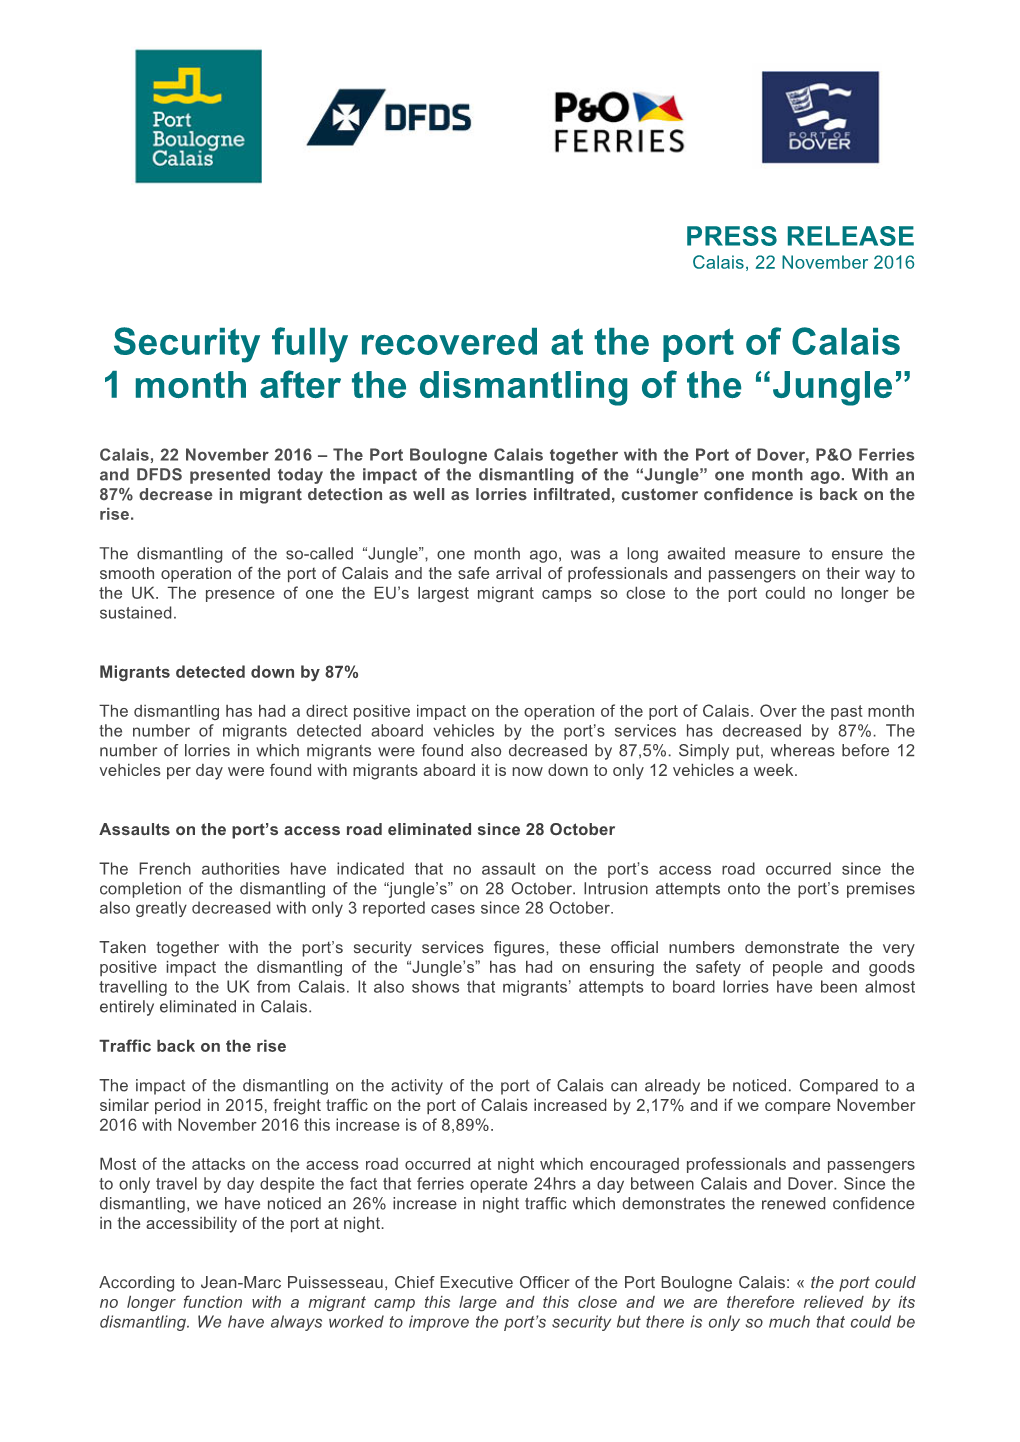 Security Fully Recovered at the Port of Calais 1 Month After the Dismantling of the “Jungle”